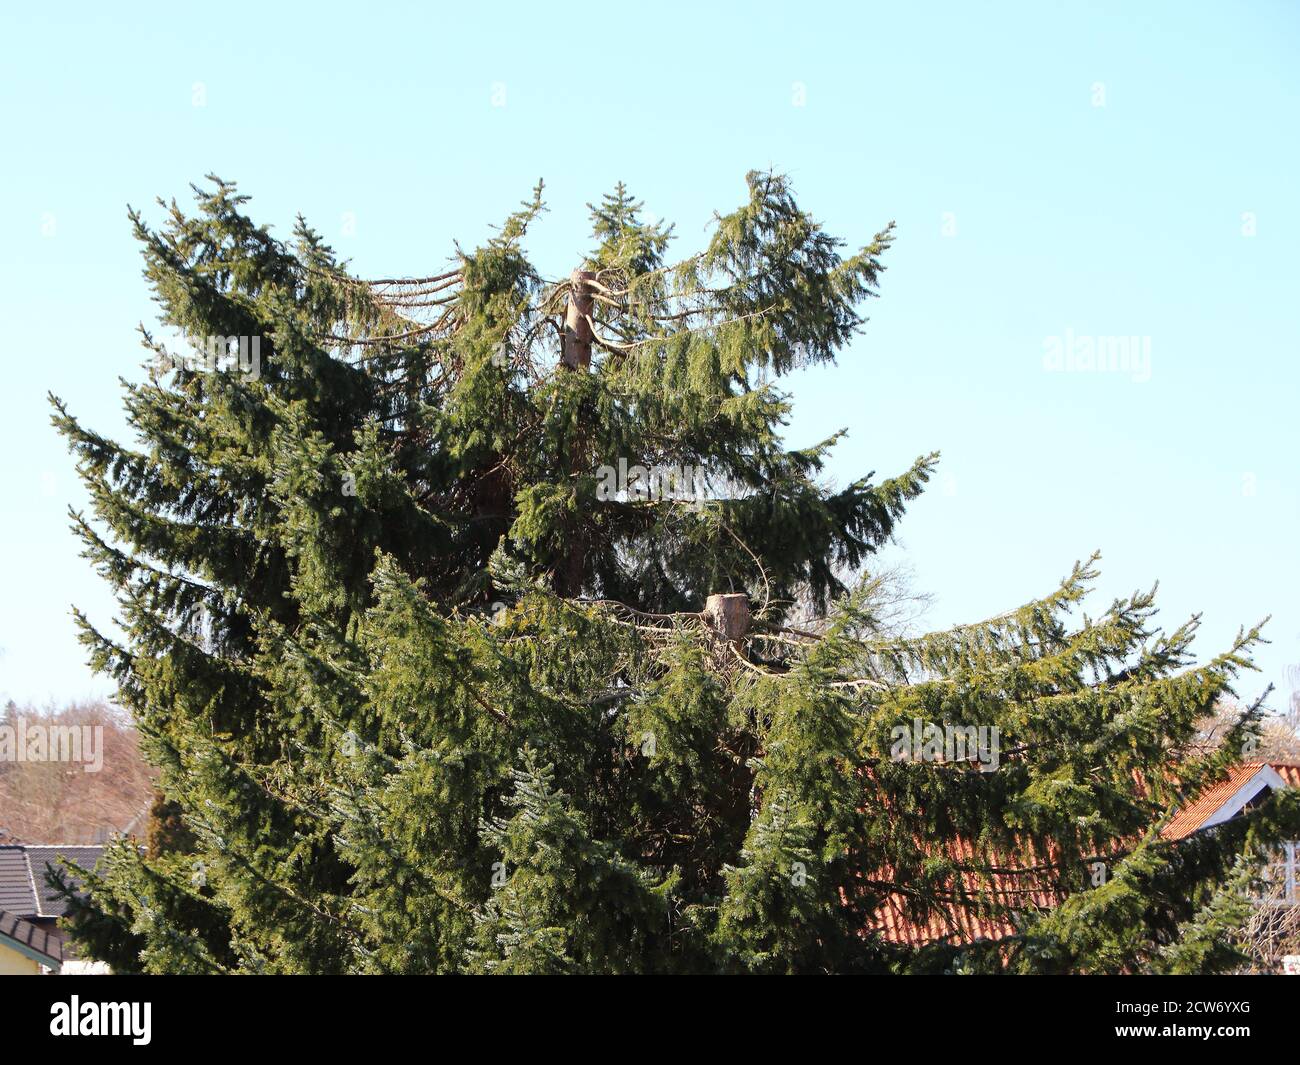 A large green pine tree that has been pollarded. Rooftops of houses can be seen in the background. Stock Photo